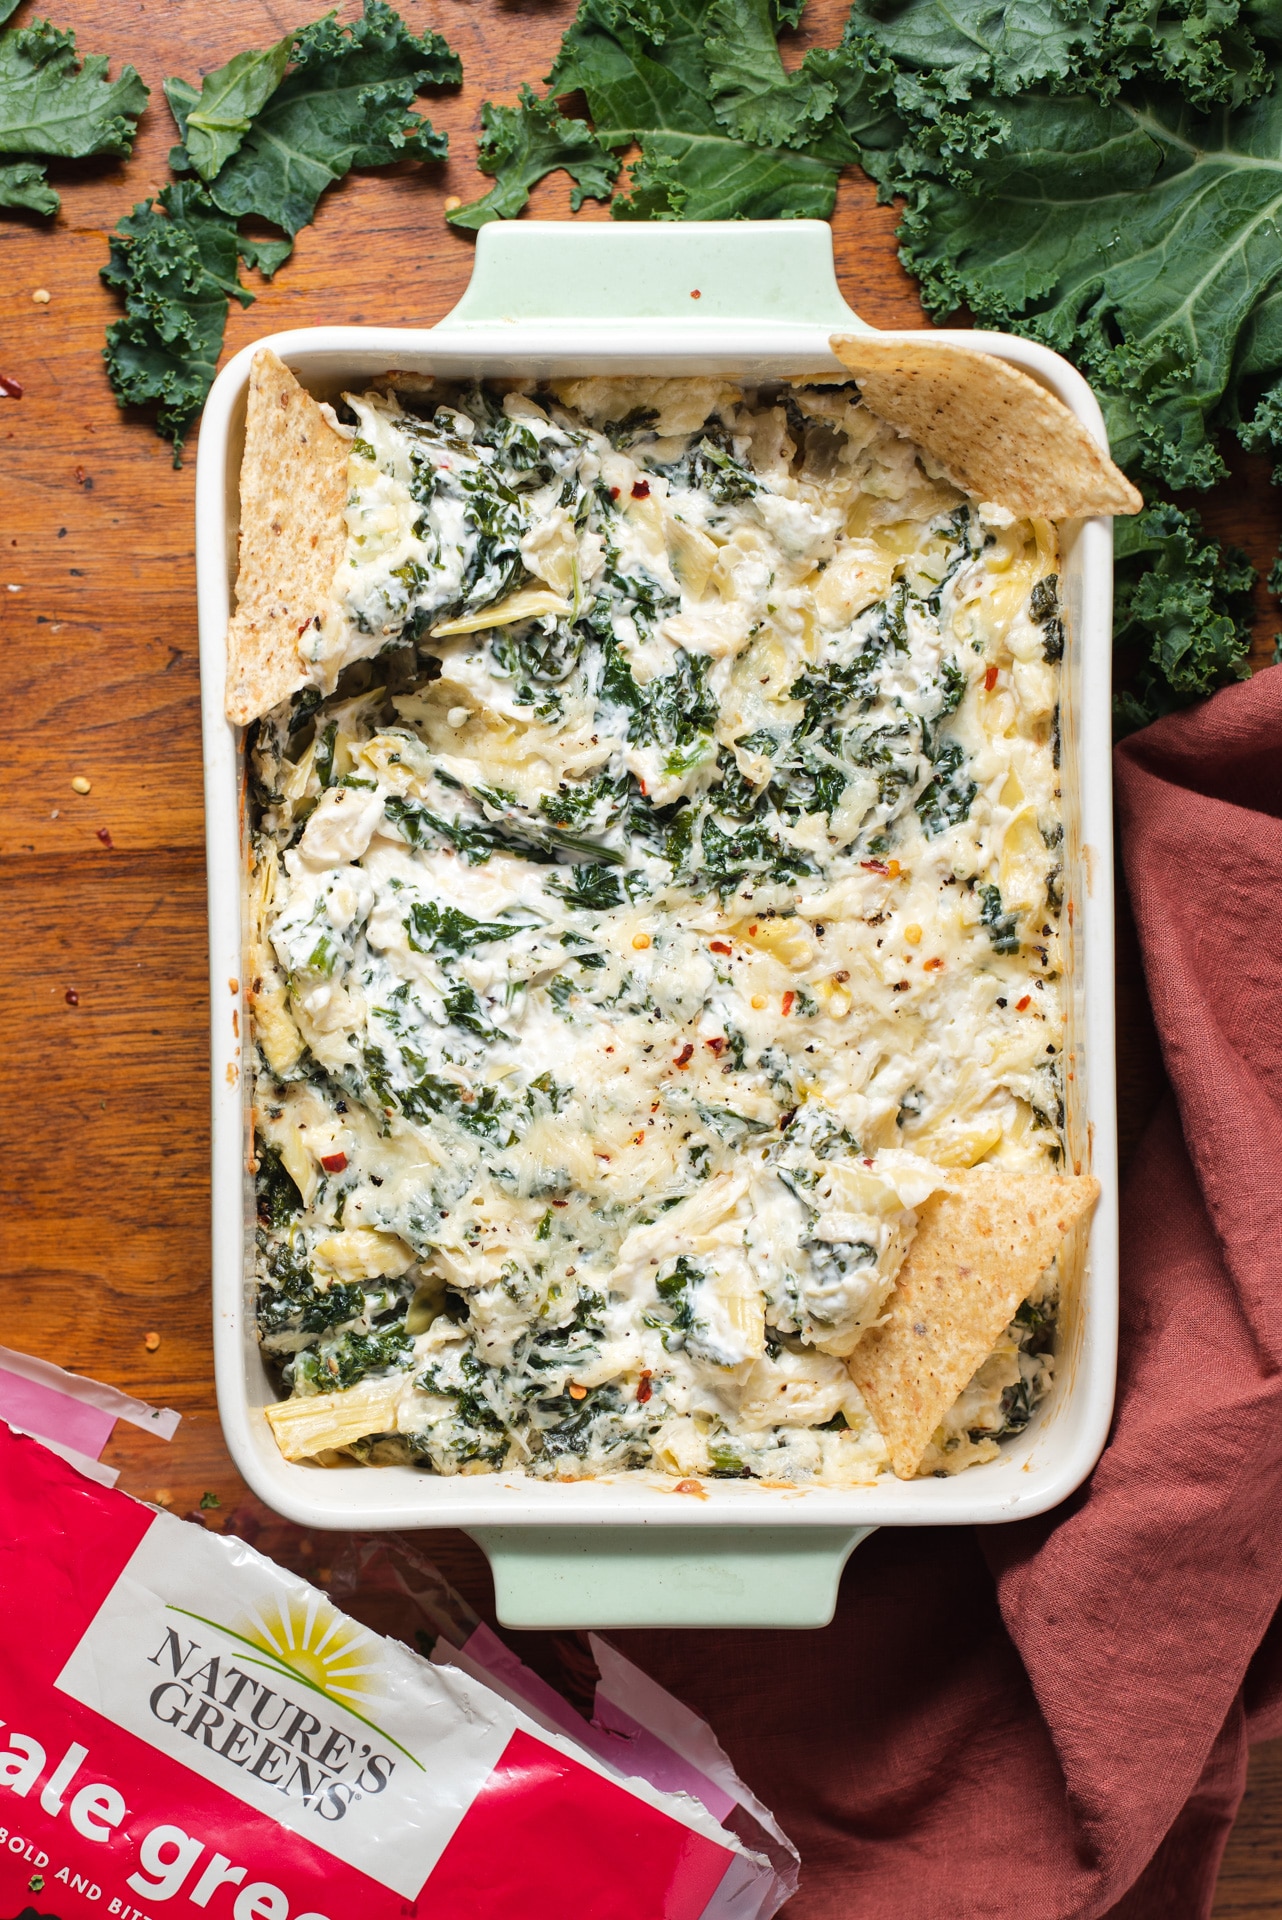 Kale artichoke dip in rectangle casserole dish with bag of Nature's Greens in bottom left corner.